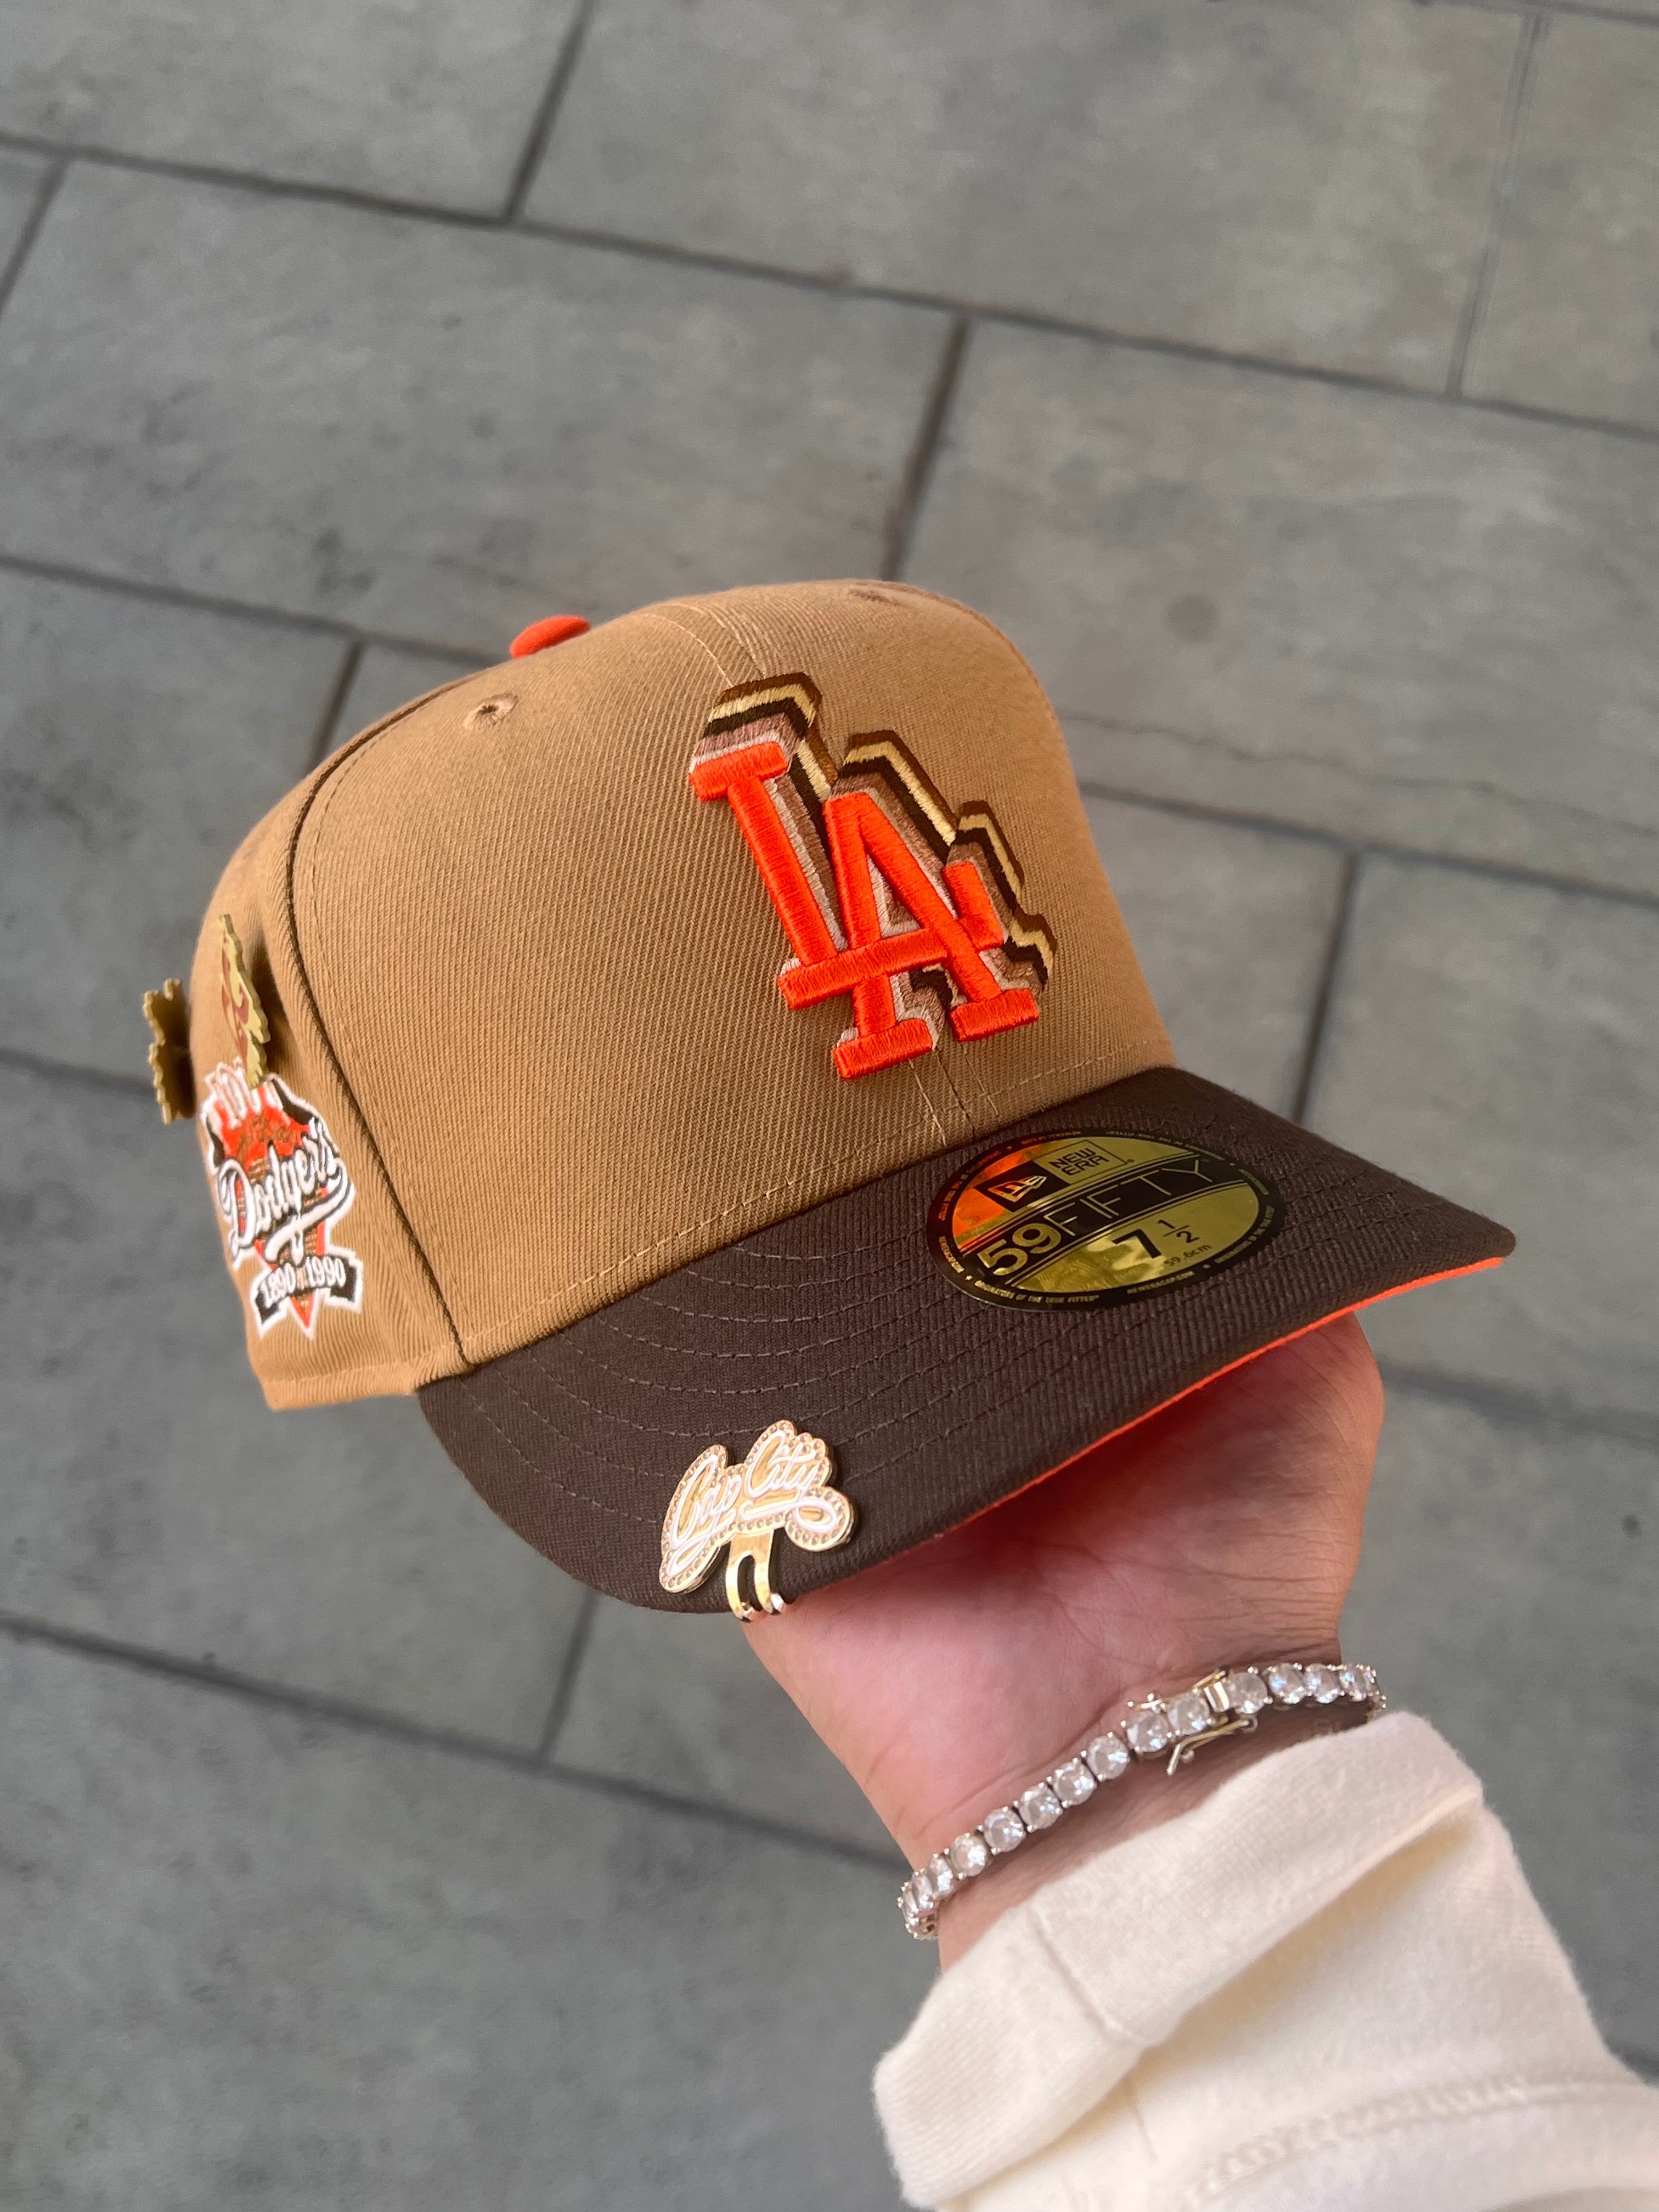 NEW ERA EXCLUSIVE 59FIFTY BROWN/WALNUT LOS ANGELES DODGERS W/ 100TH ANNIVERSARY PATCH